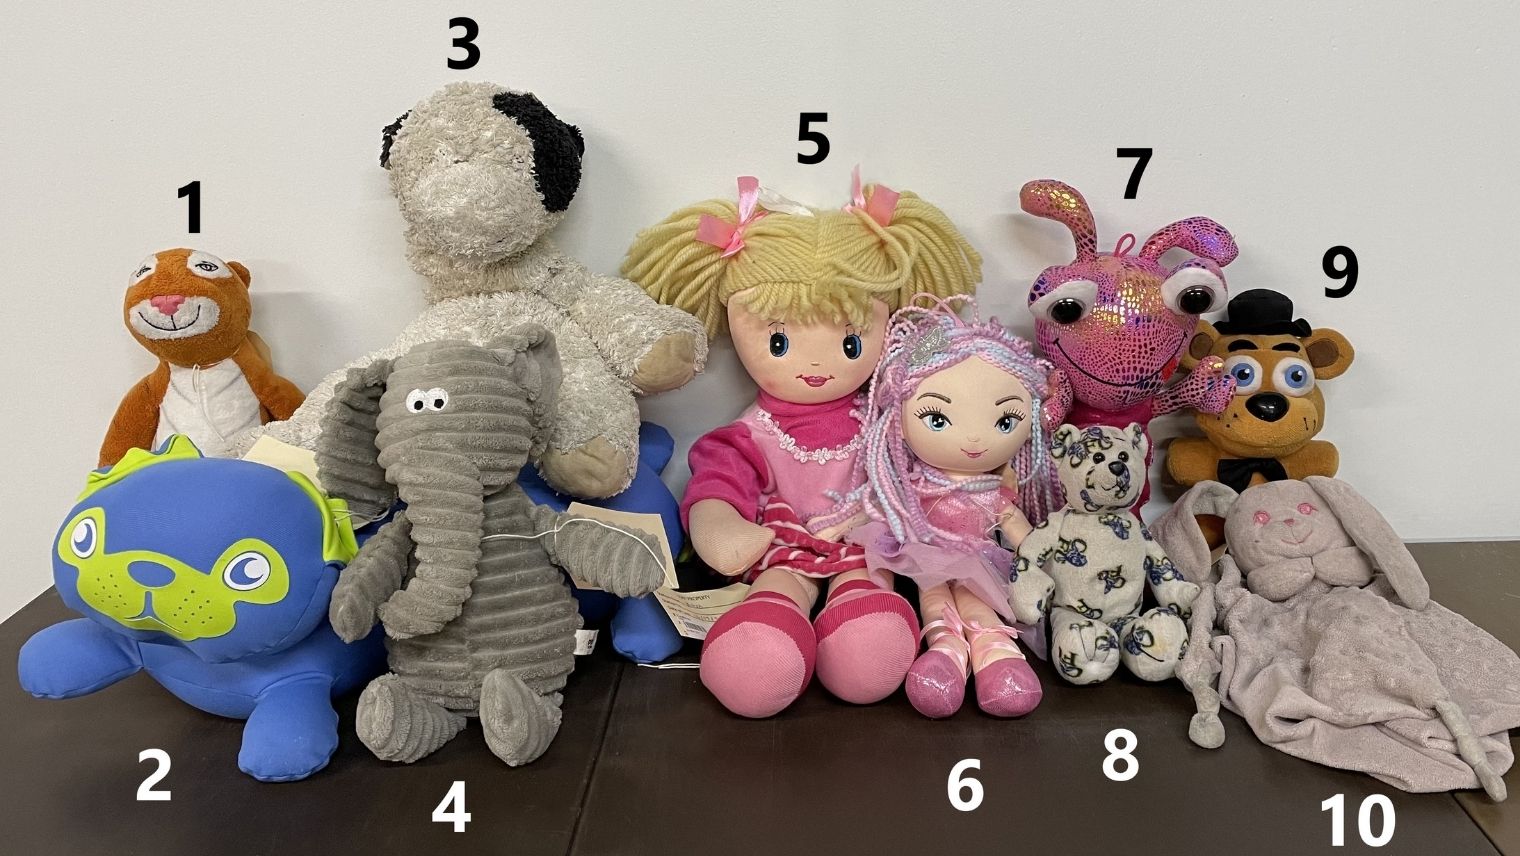 Some of the lost teddies that SWR are seeking to return to owners